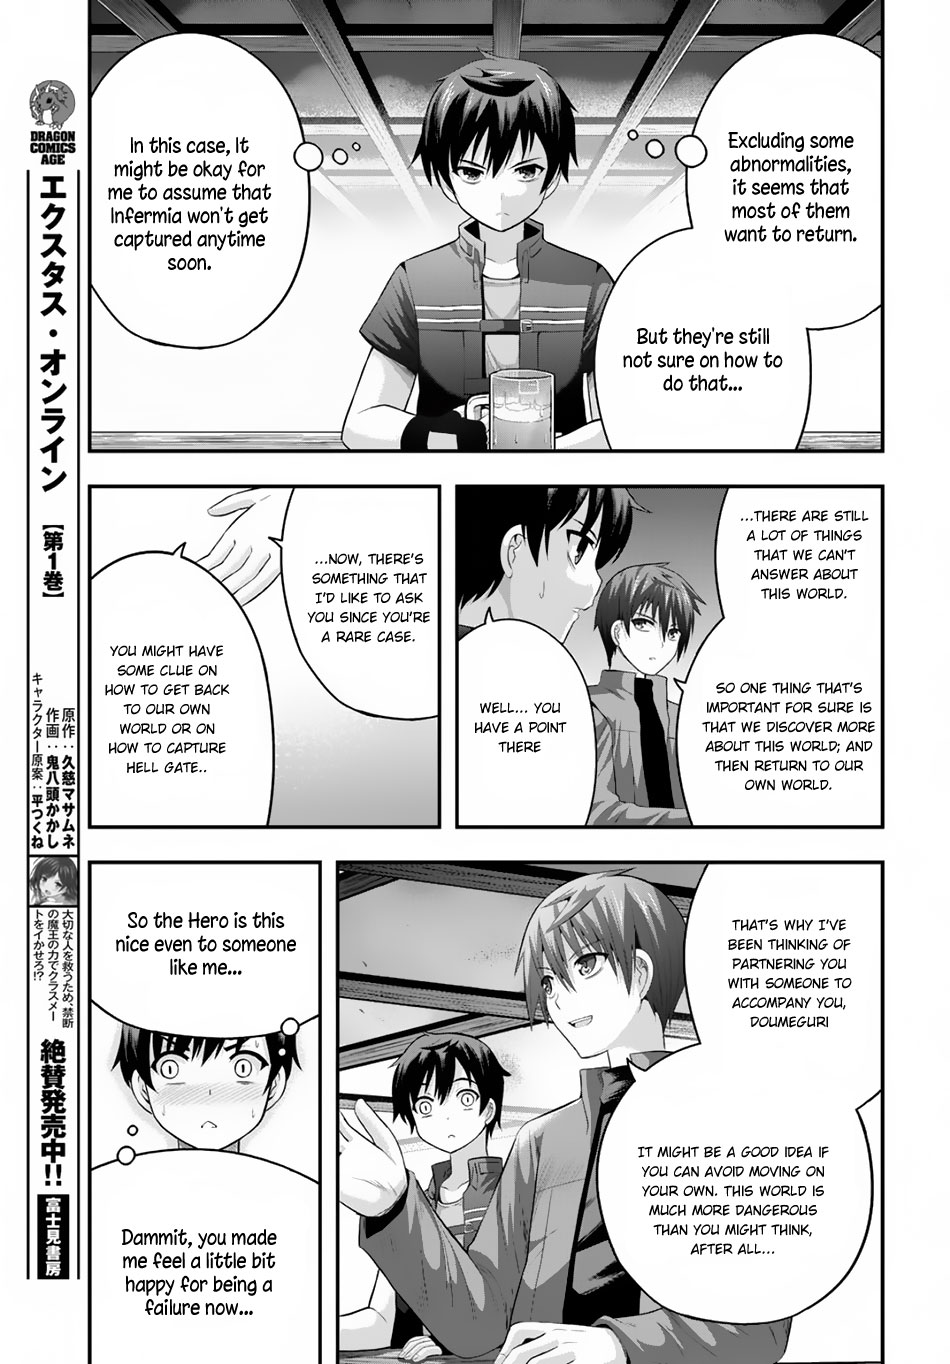 Ecstas Online Ch. 9 Even in the Game, Our Hierarchy from the Real World Doesn...